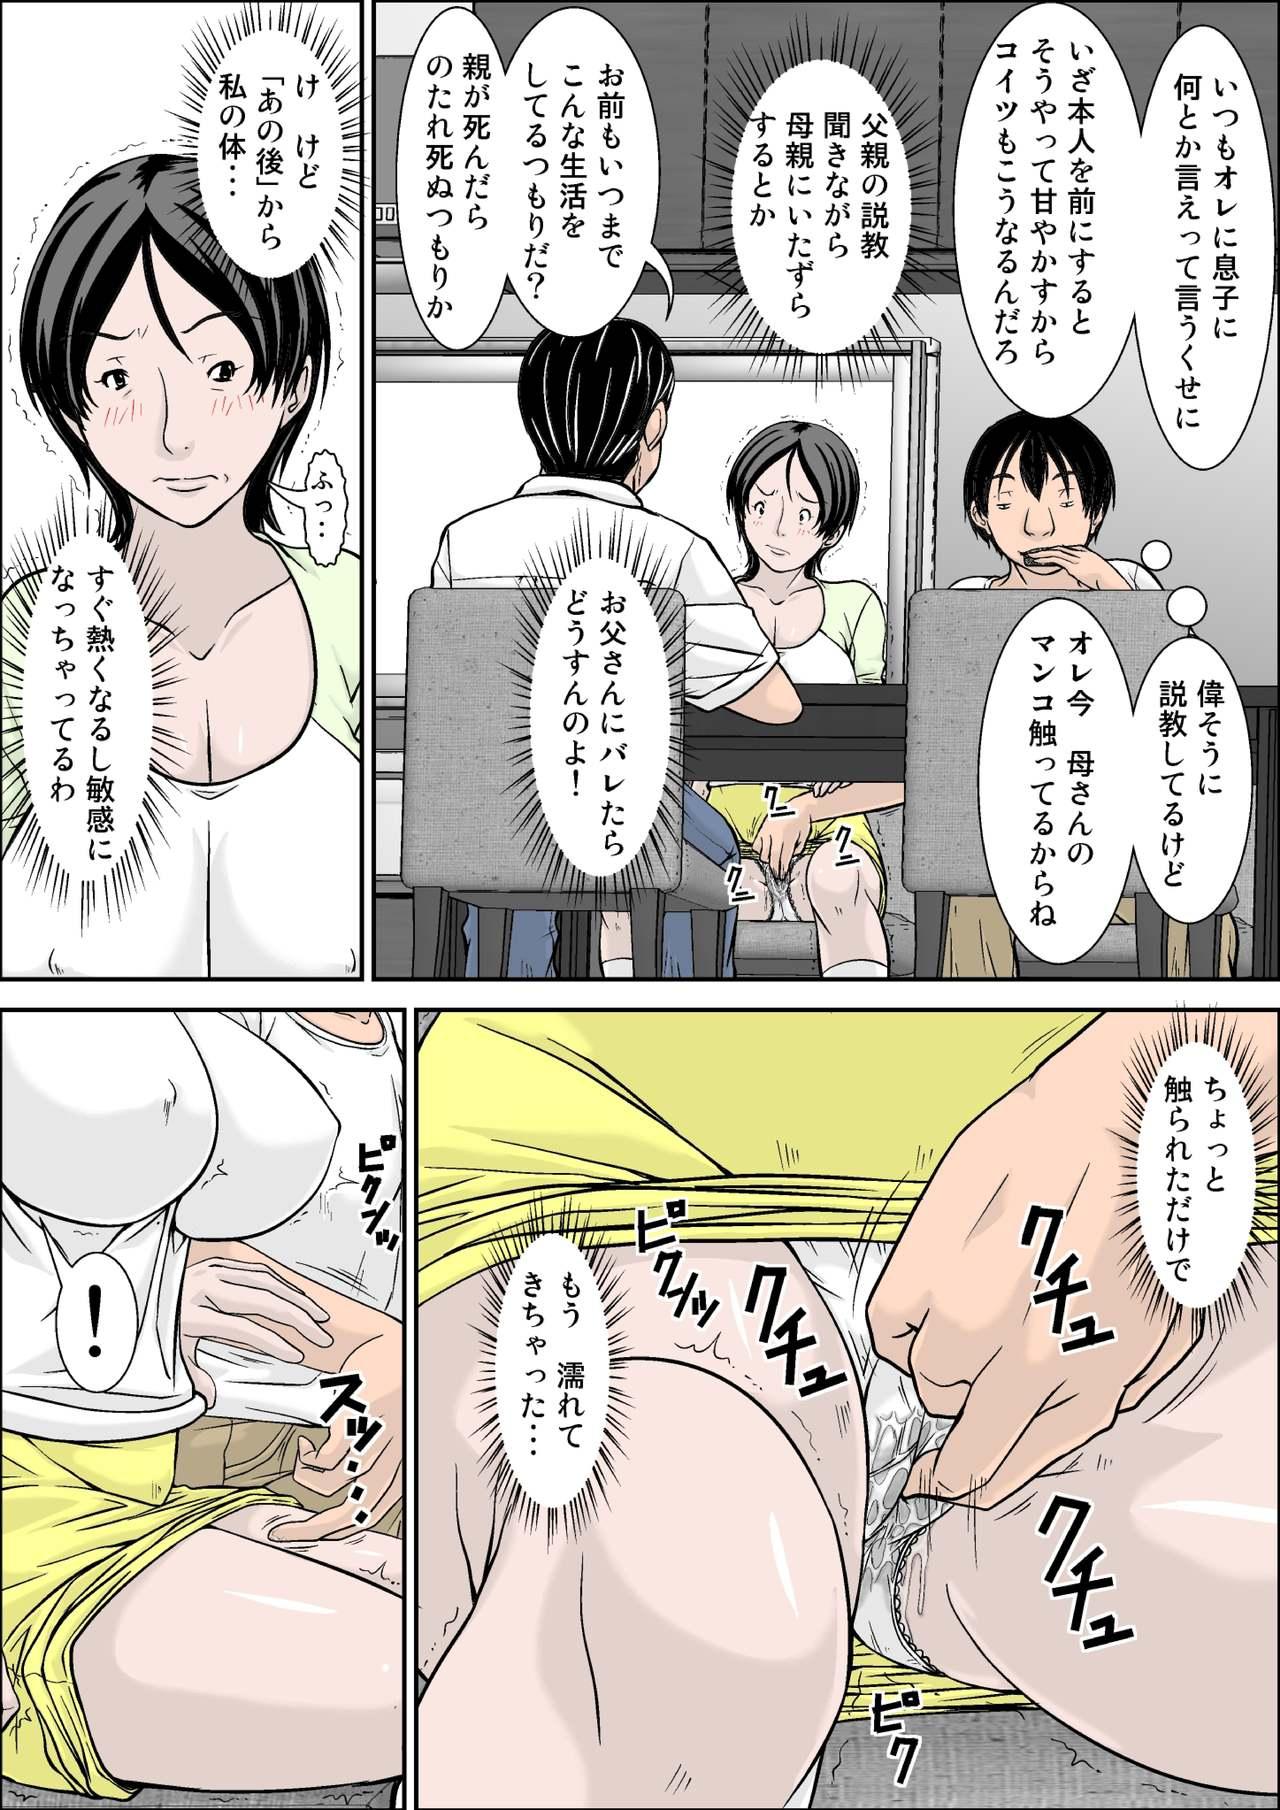 Hey! It is said that I urge you mother and will do what! ... mother Hatsujou - 1st part 14